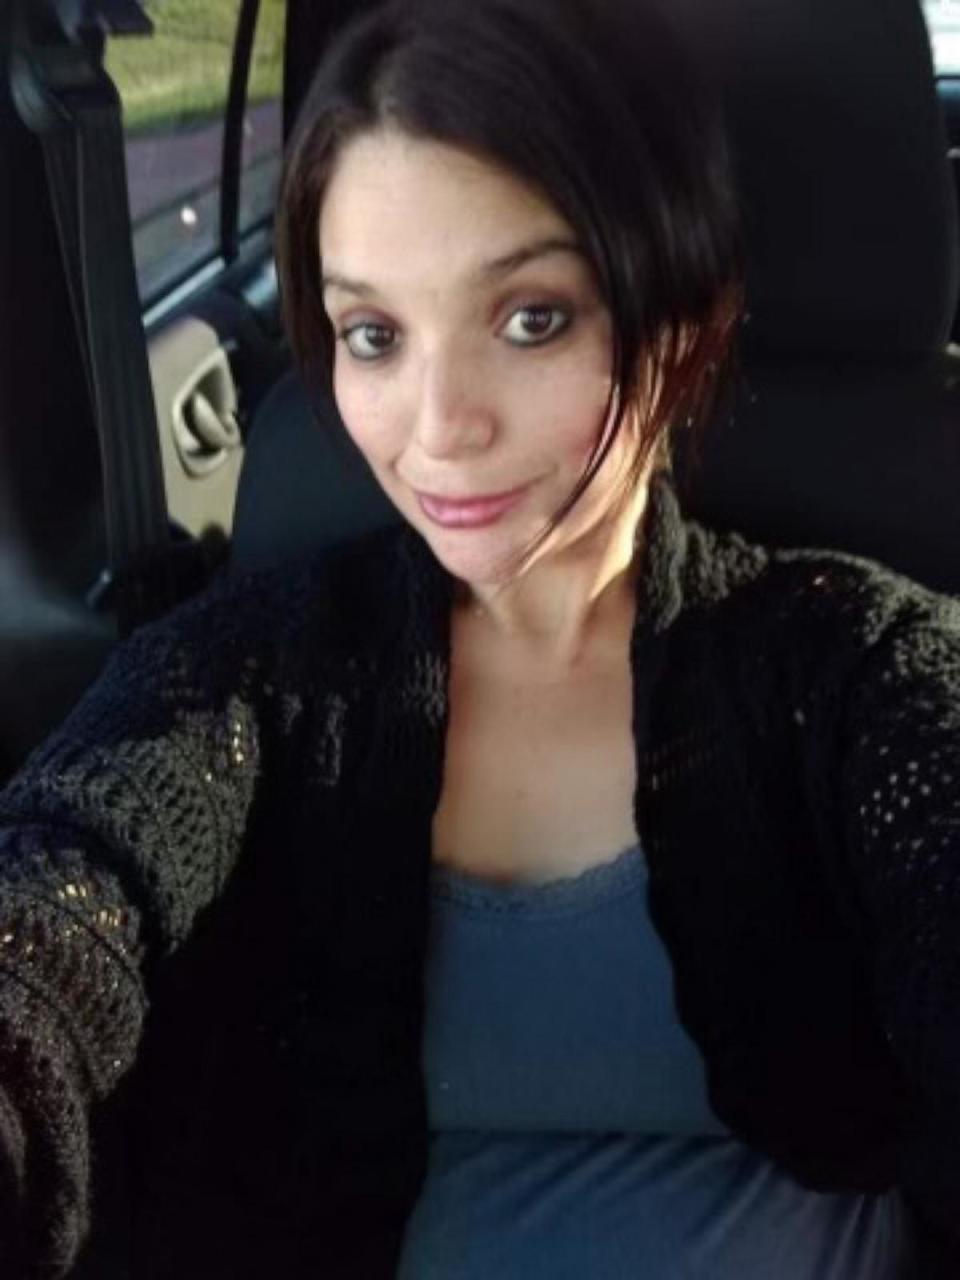 PHOTO: Melissa Ramirez was one of four victims killed in September 2018 by a Border Patrol agent in Laredo, Texas.  (Maria Cristina Benavides)